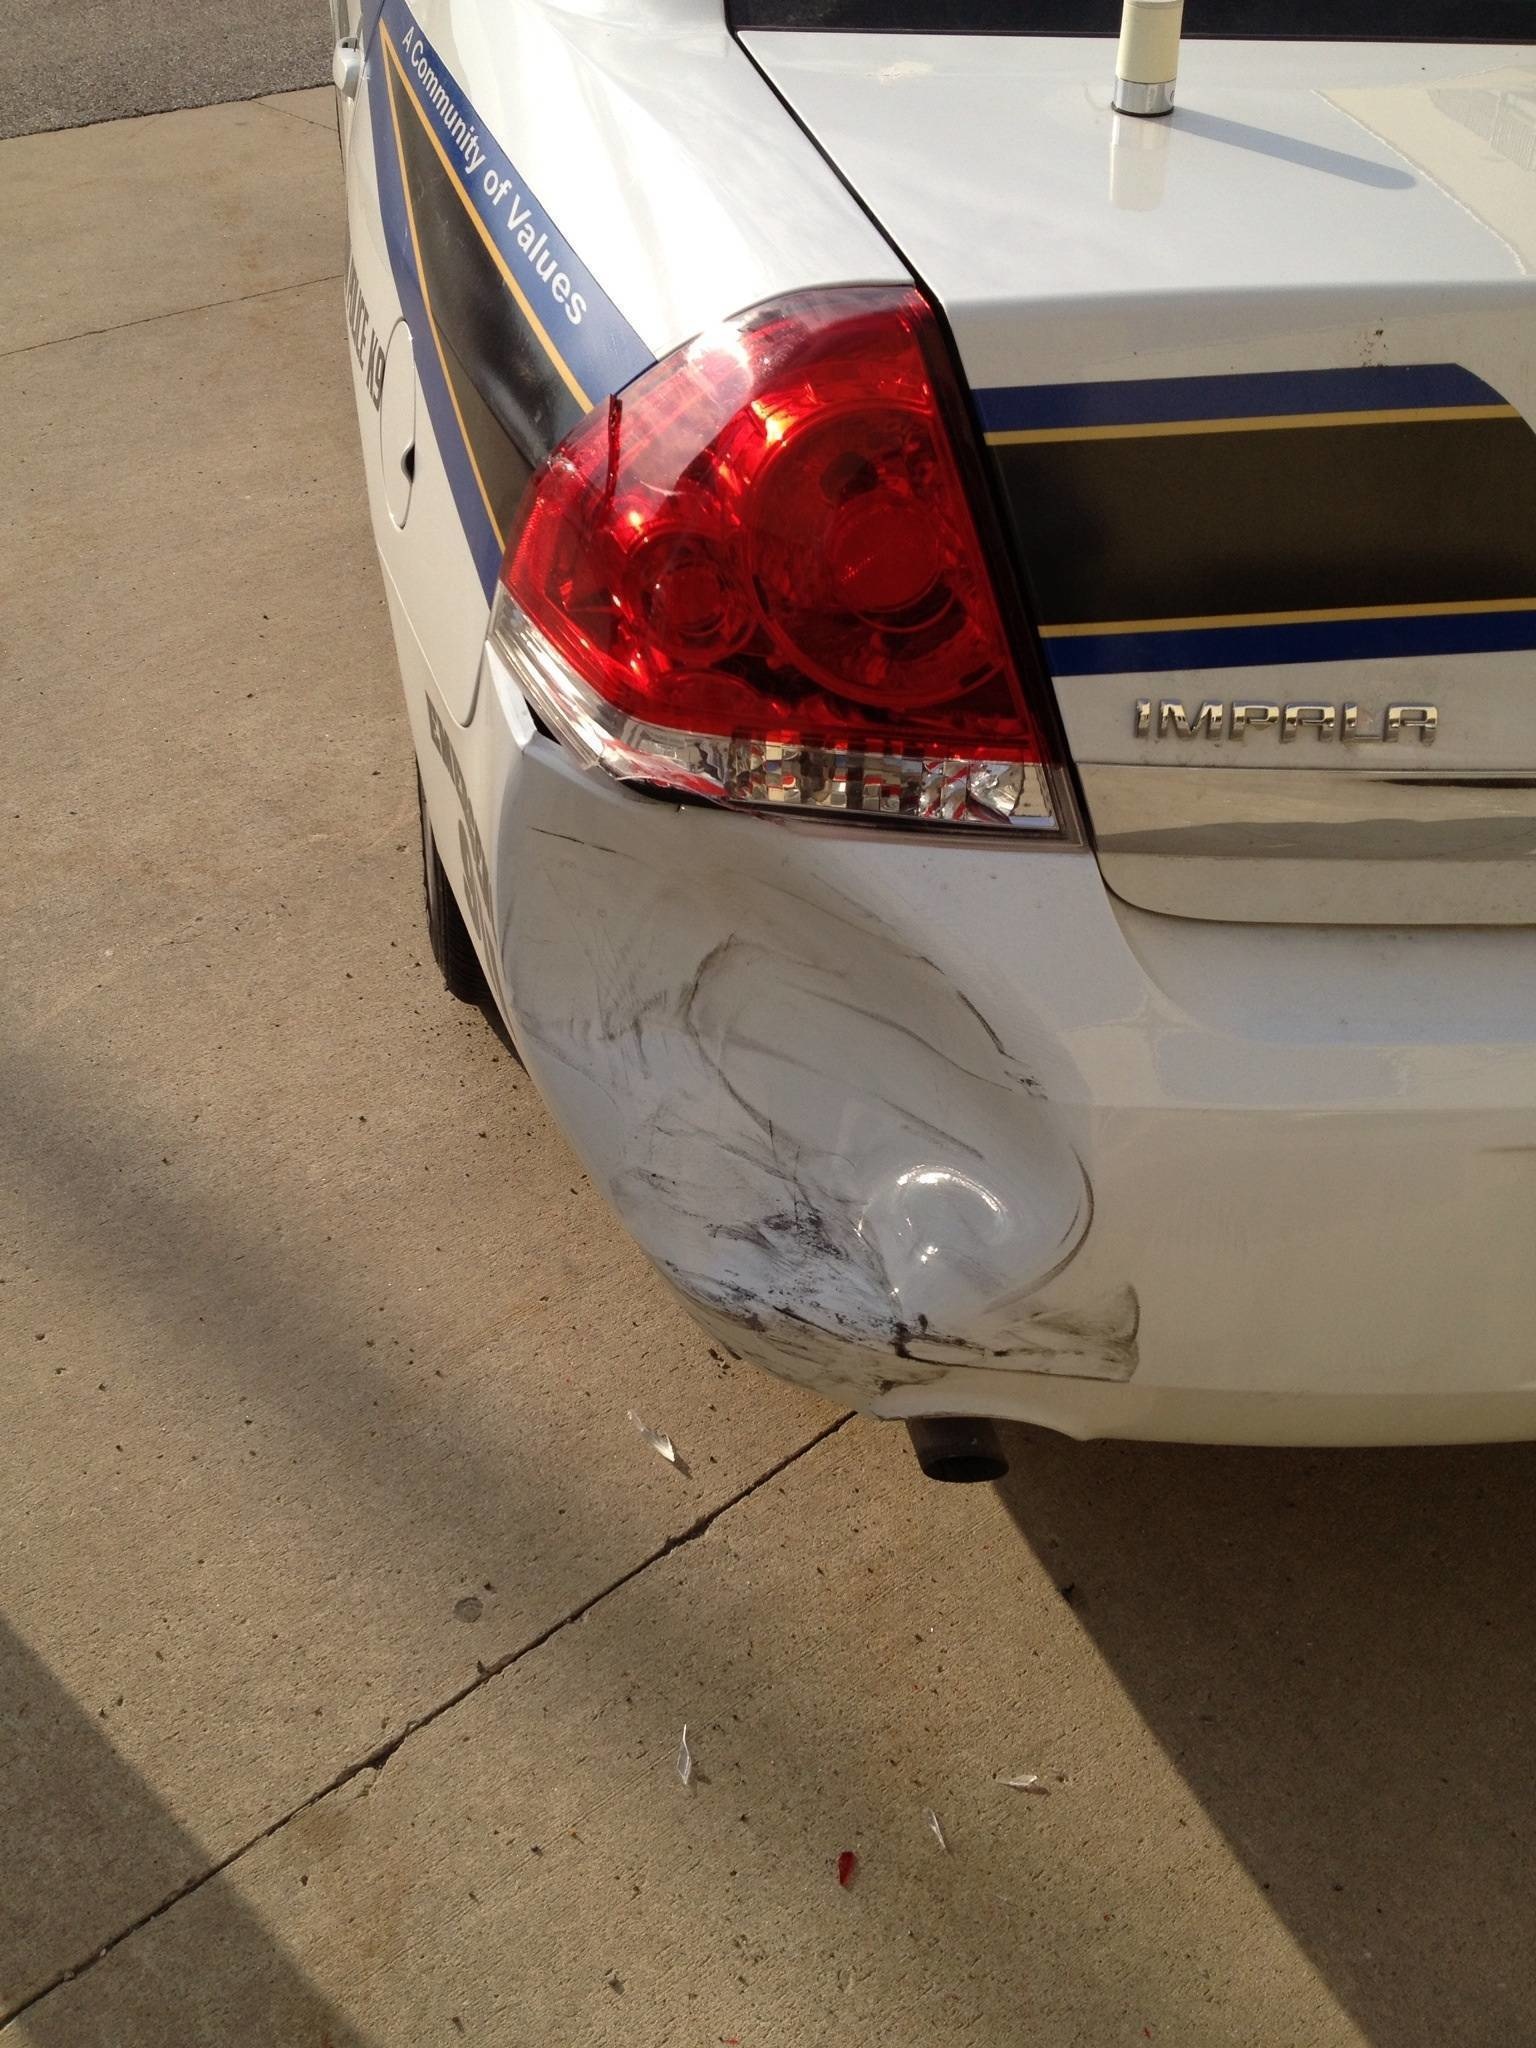 Nothing worse than hitting a police car.